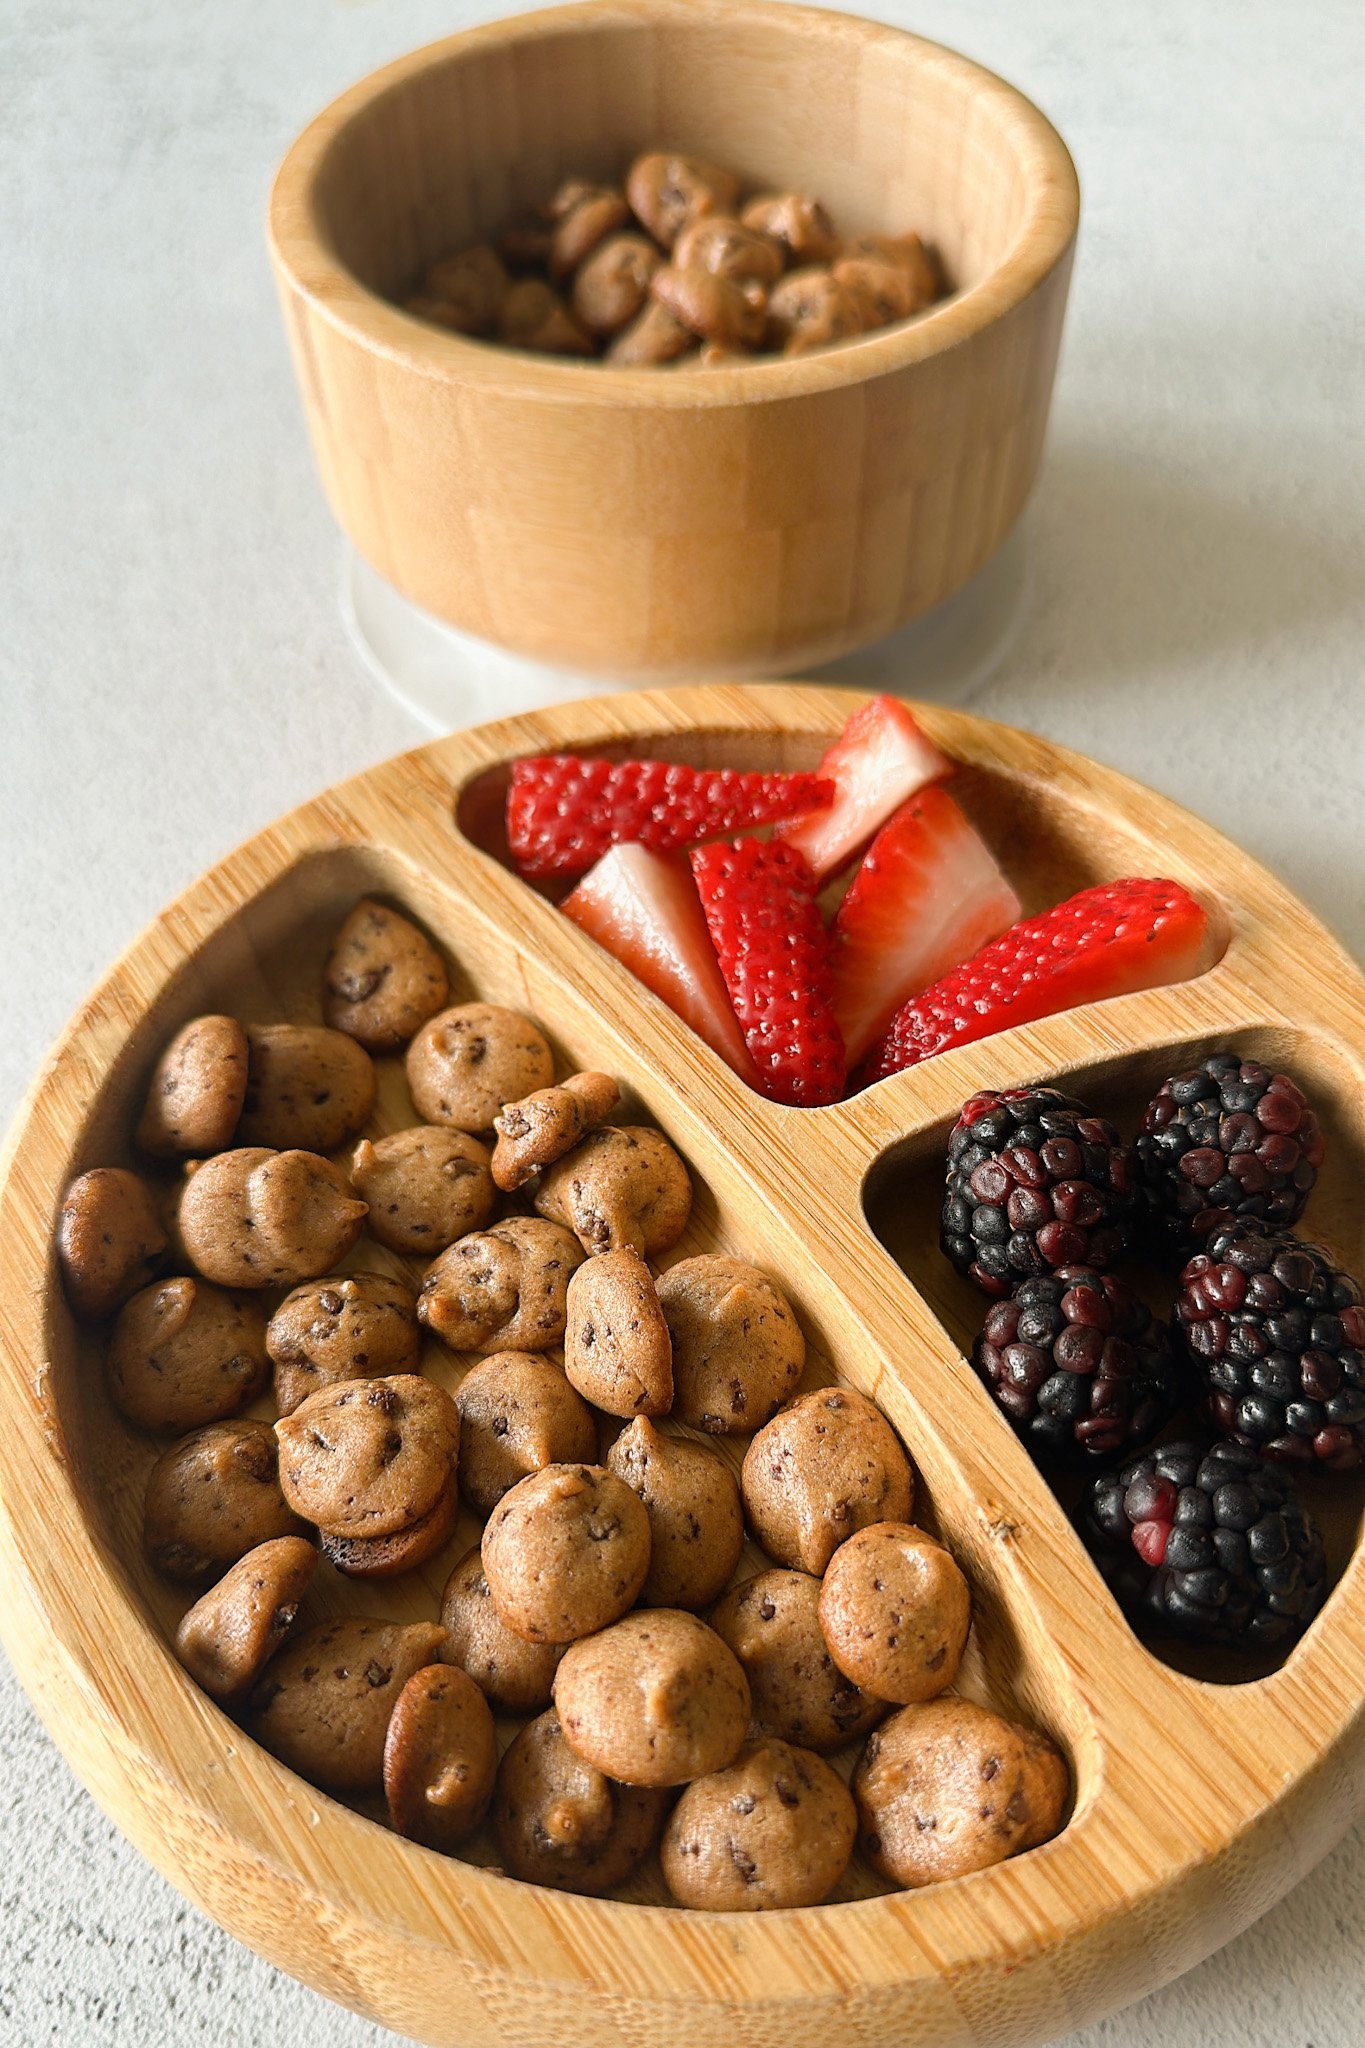 Homemade cooke cereal served with berries.